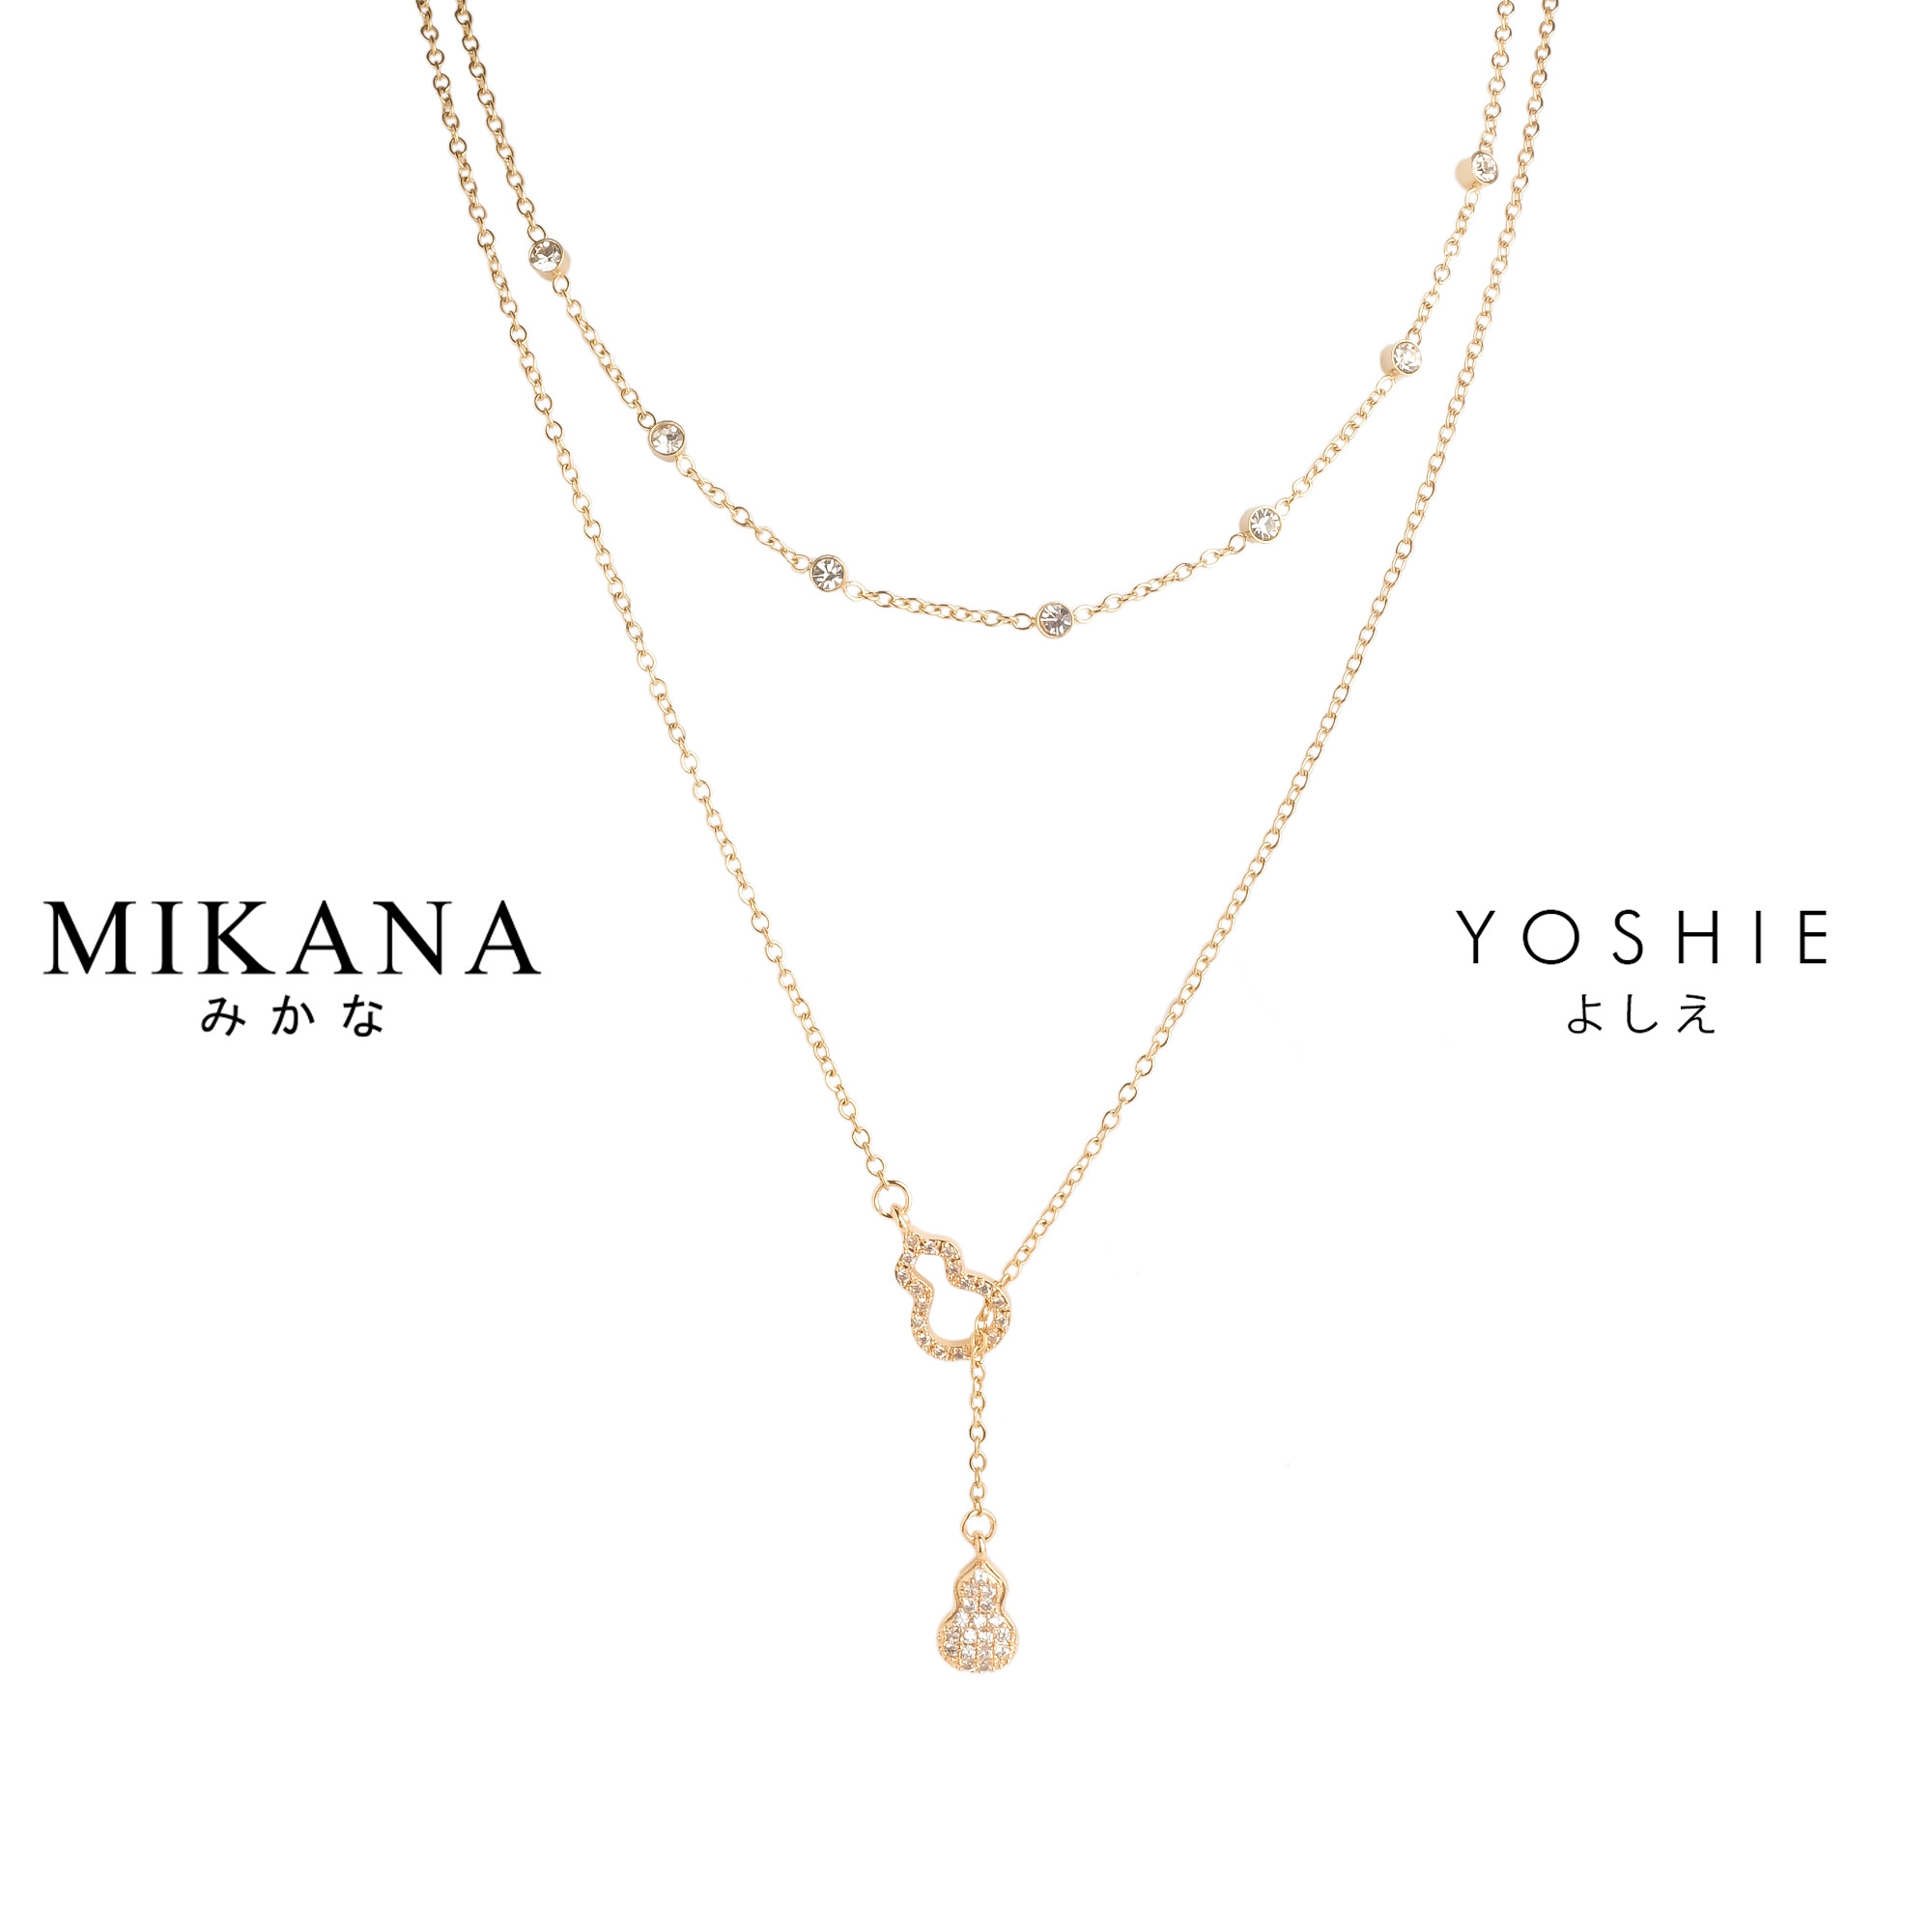 Mikana Summer String 18k Gold Plated Yoshie Layered Pendant Necklace ...